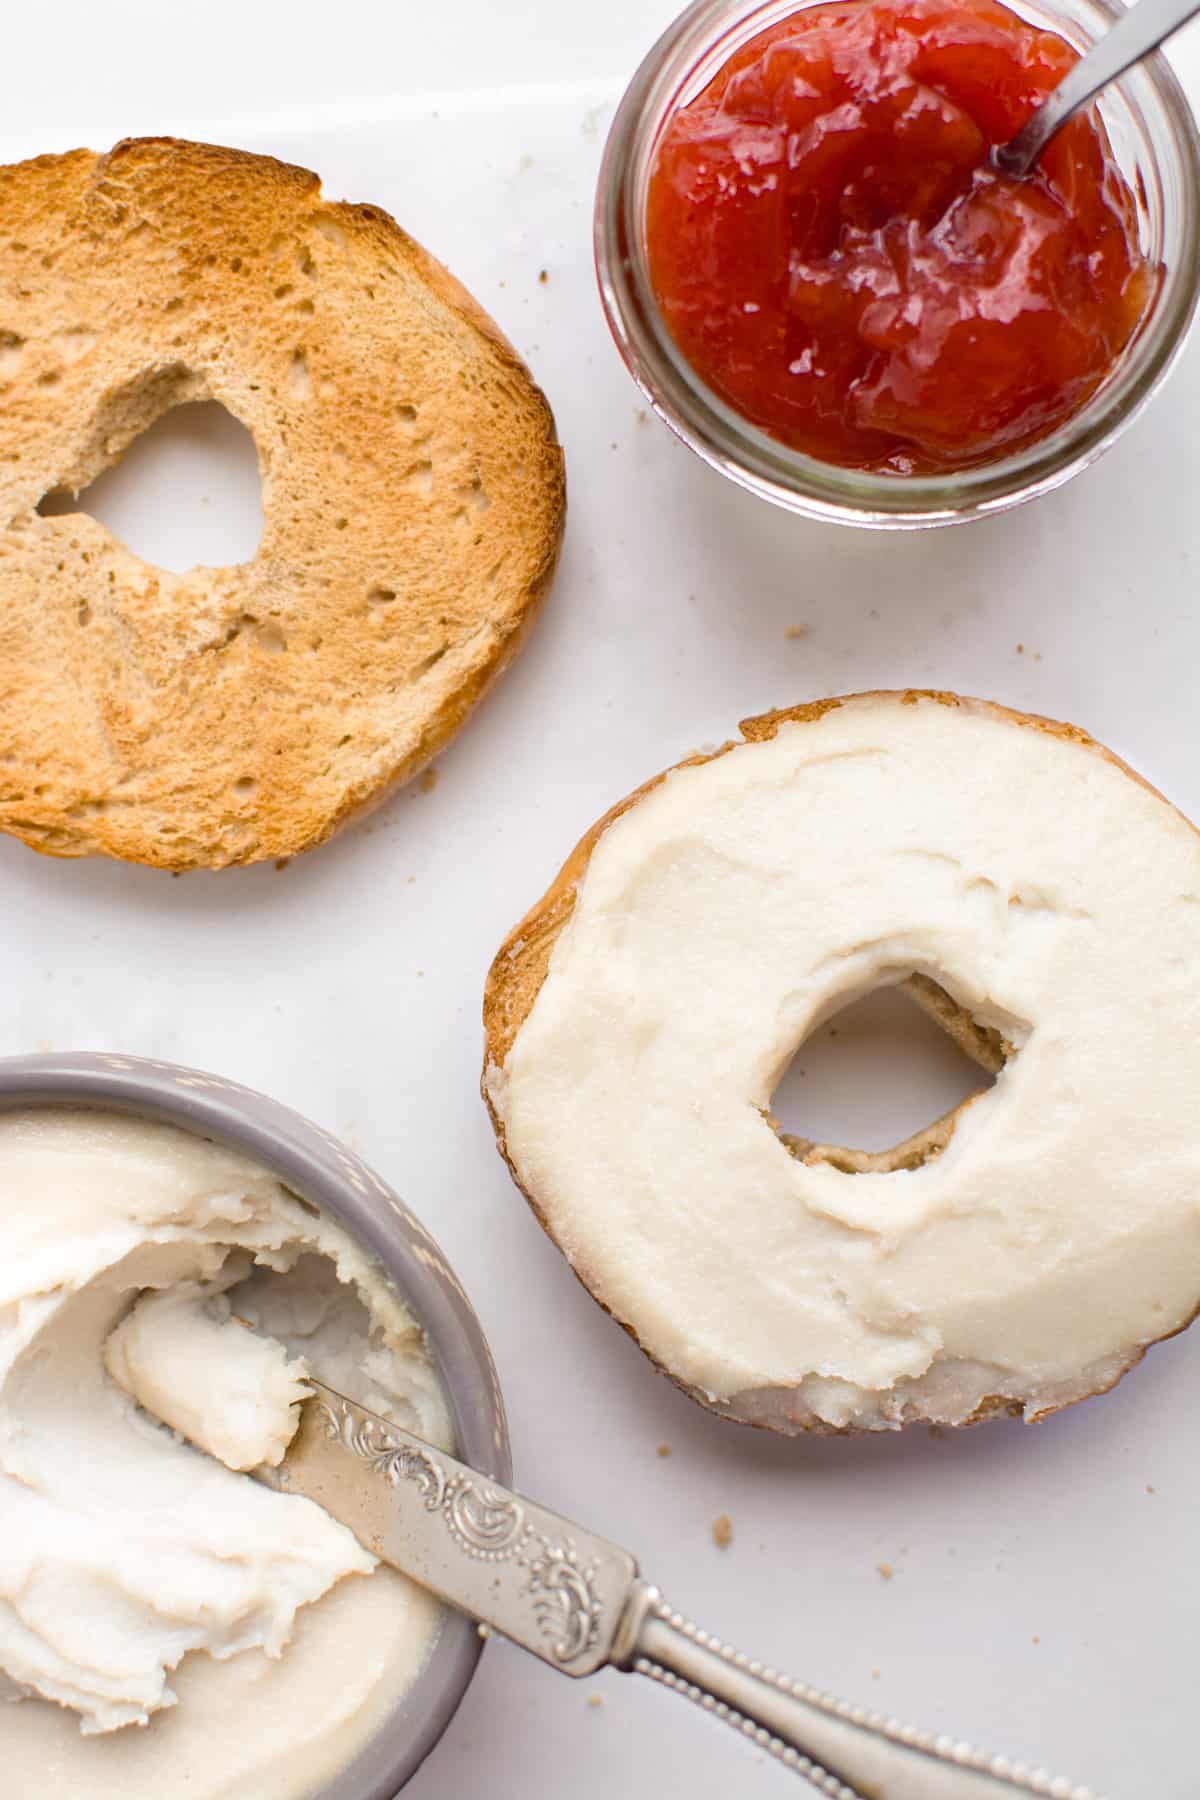 Cashew cream cheese spread on a toasted bagel.